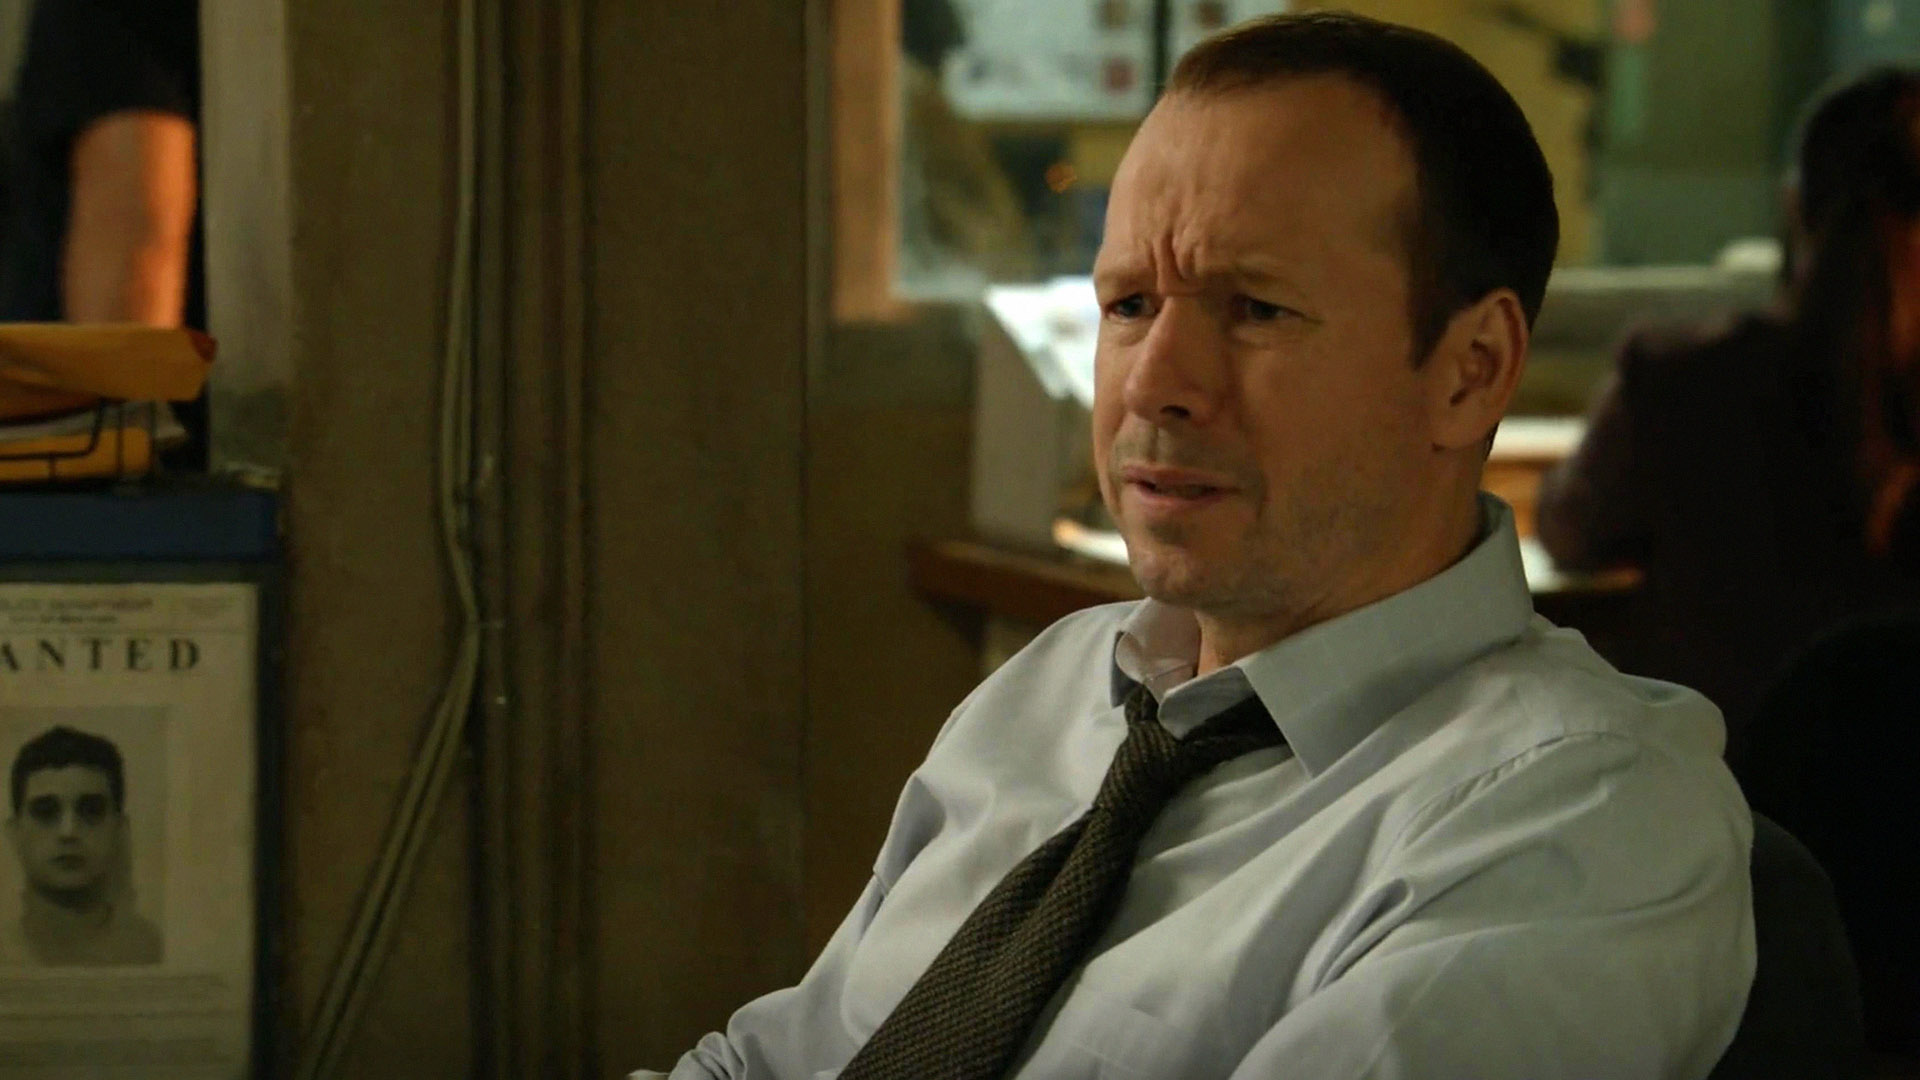 Blue Bloods Classics Are on CBS Right Now, but When Will Season 14 Air?